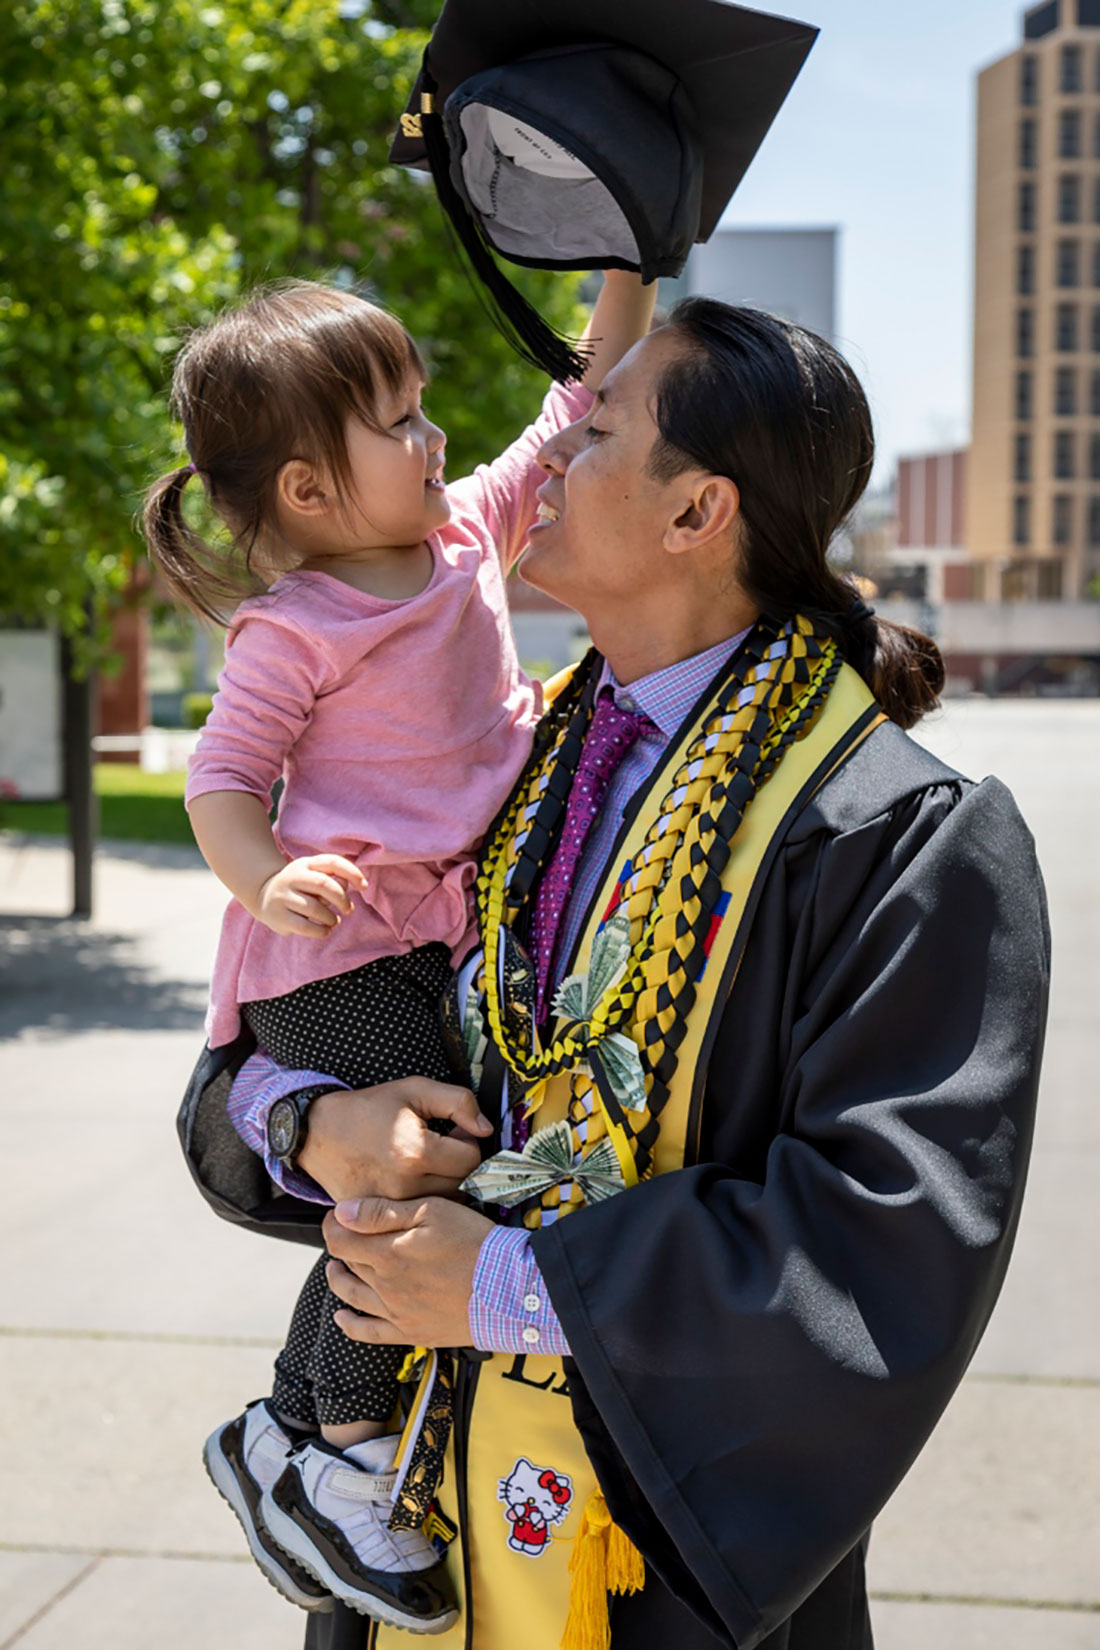 Thaisan N. wearing graduation robes holding a baby